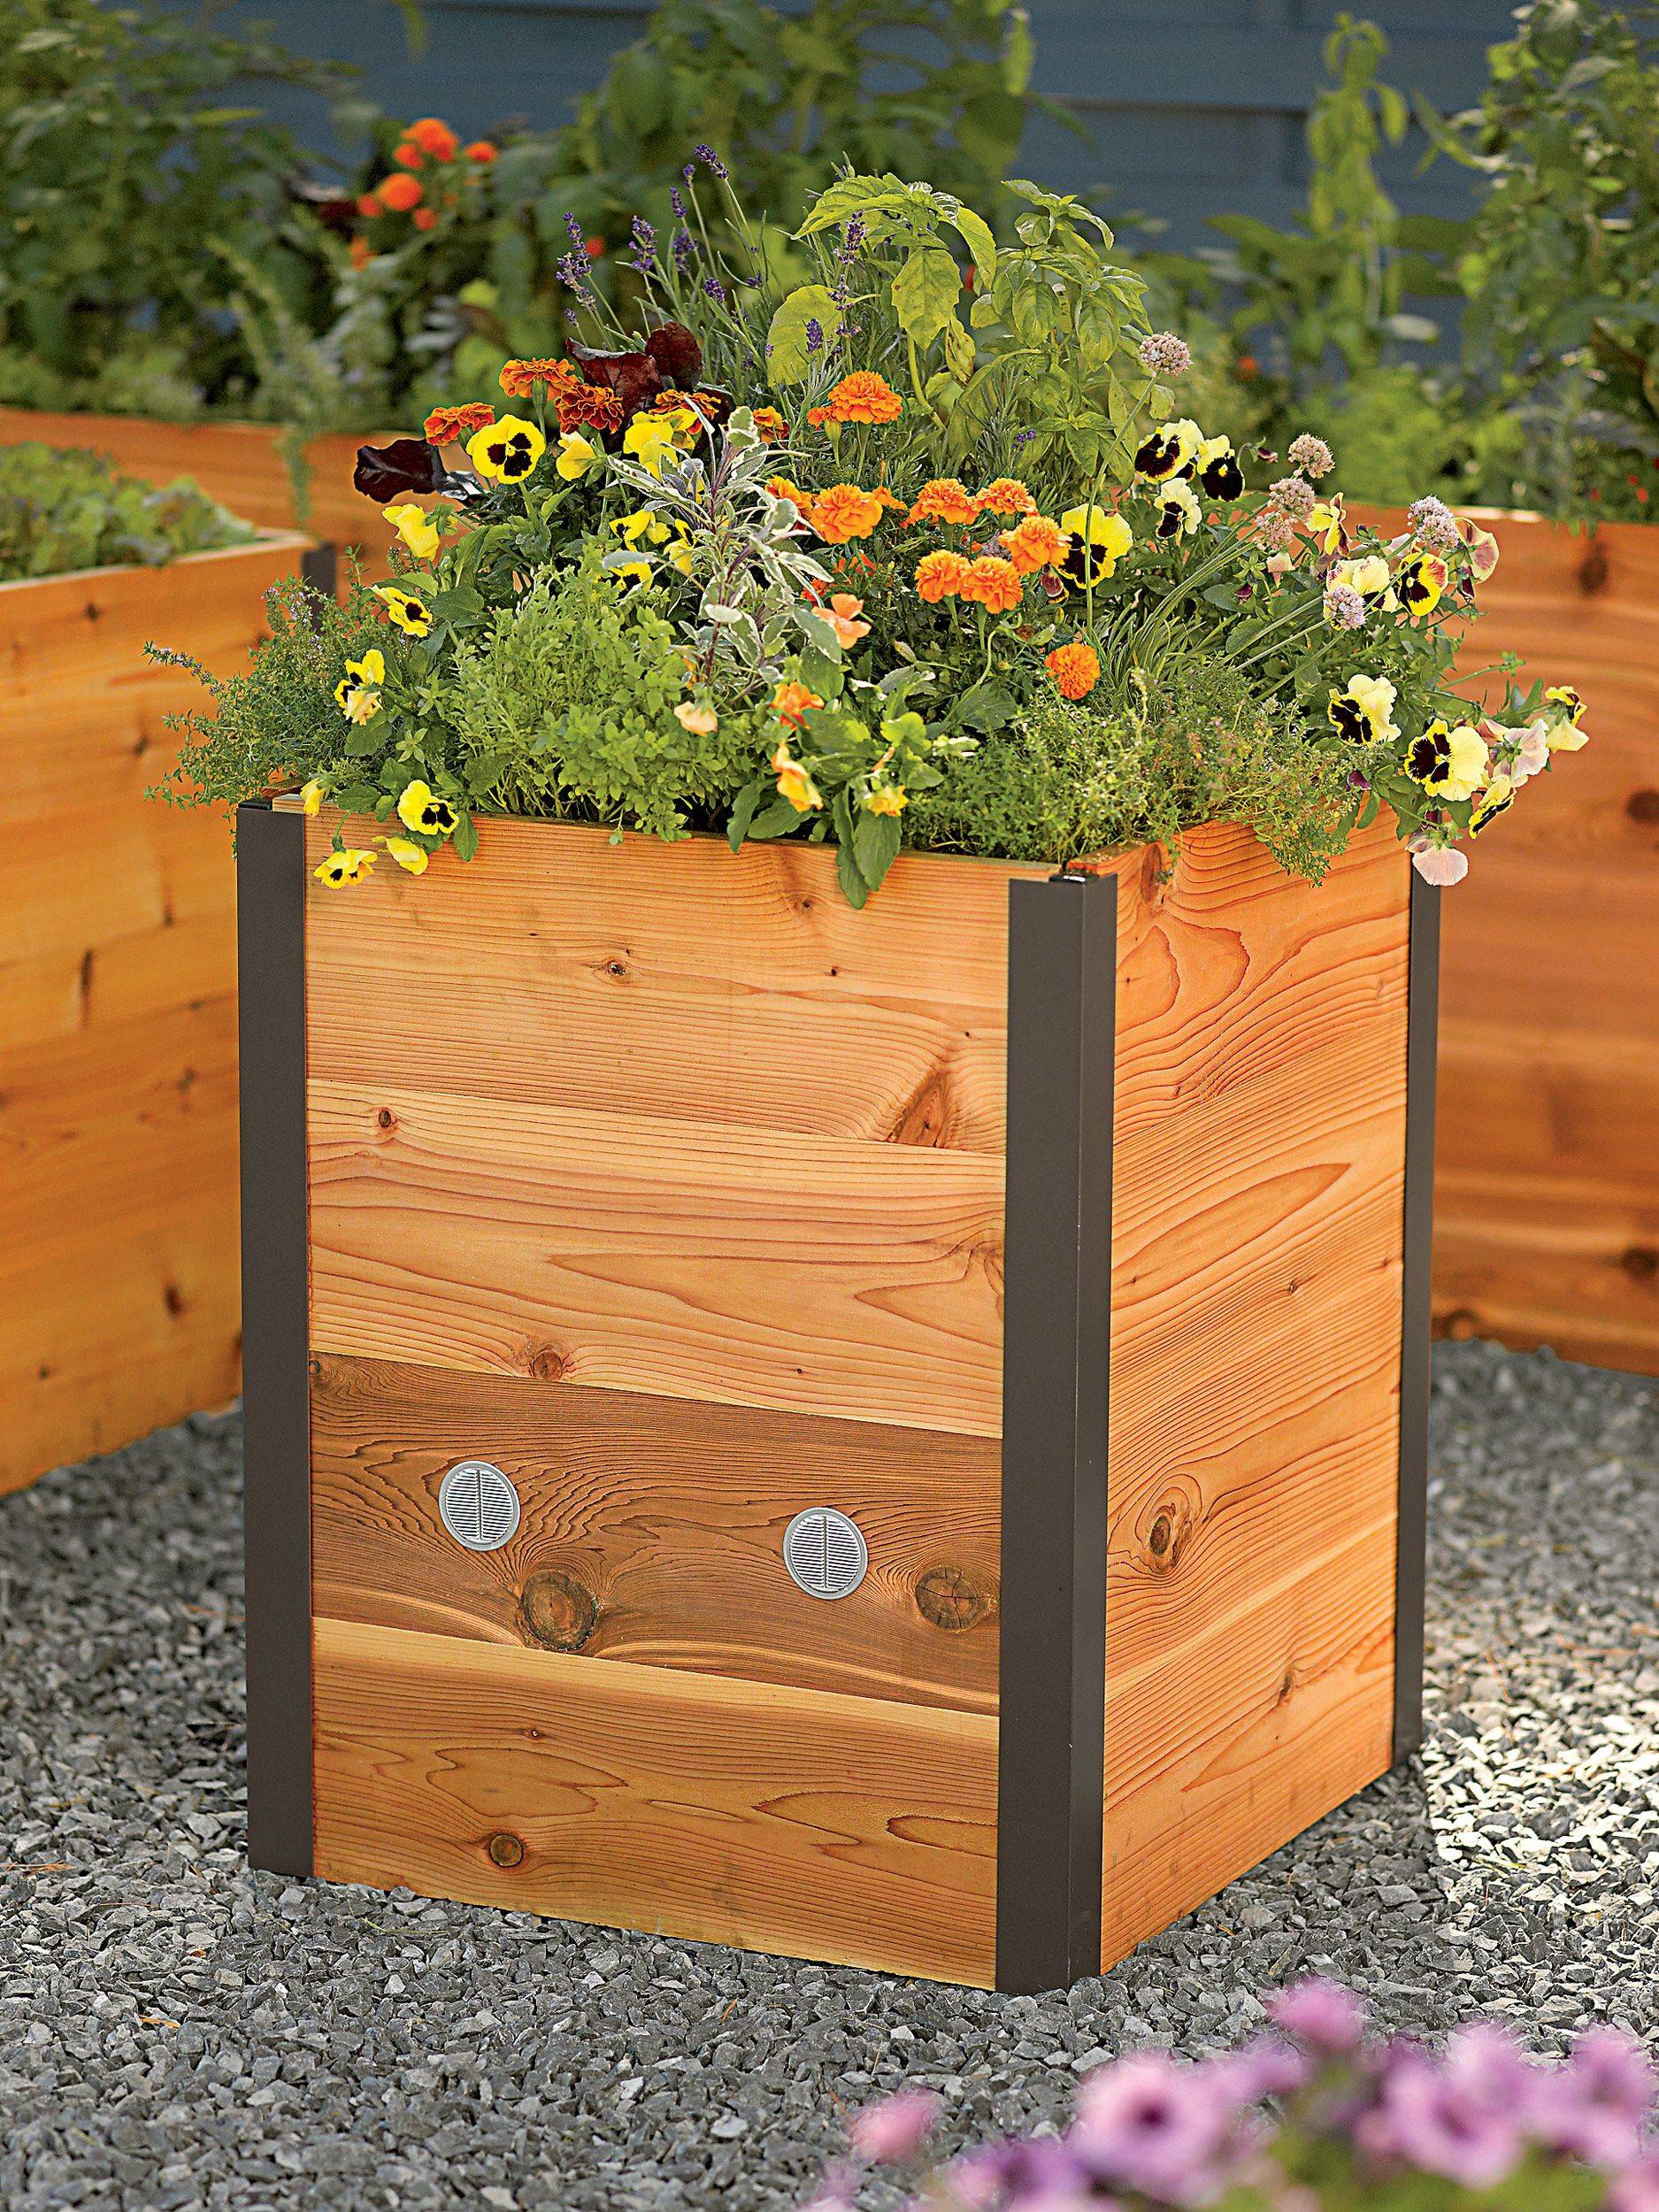 Rusted Corrugated Iron Planters